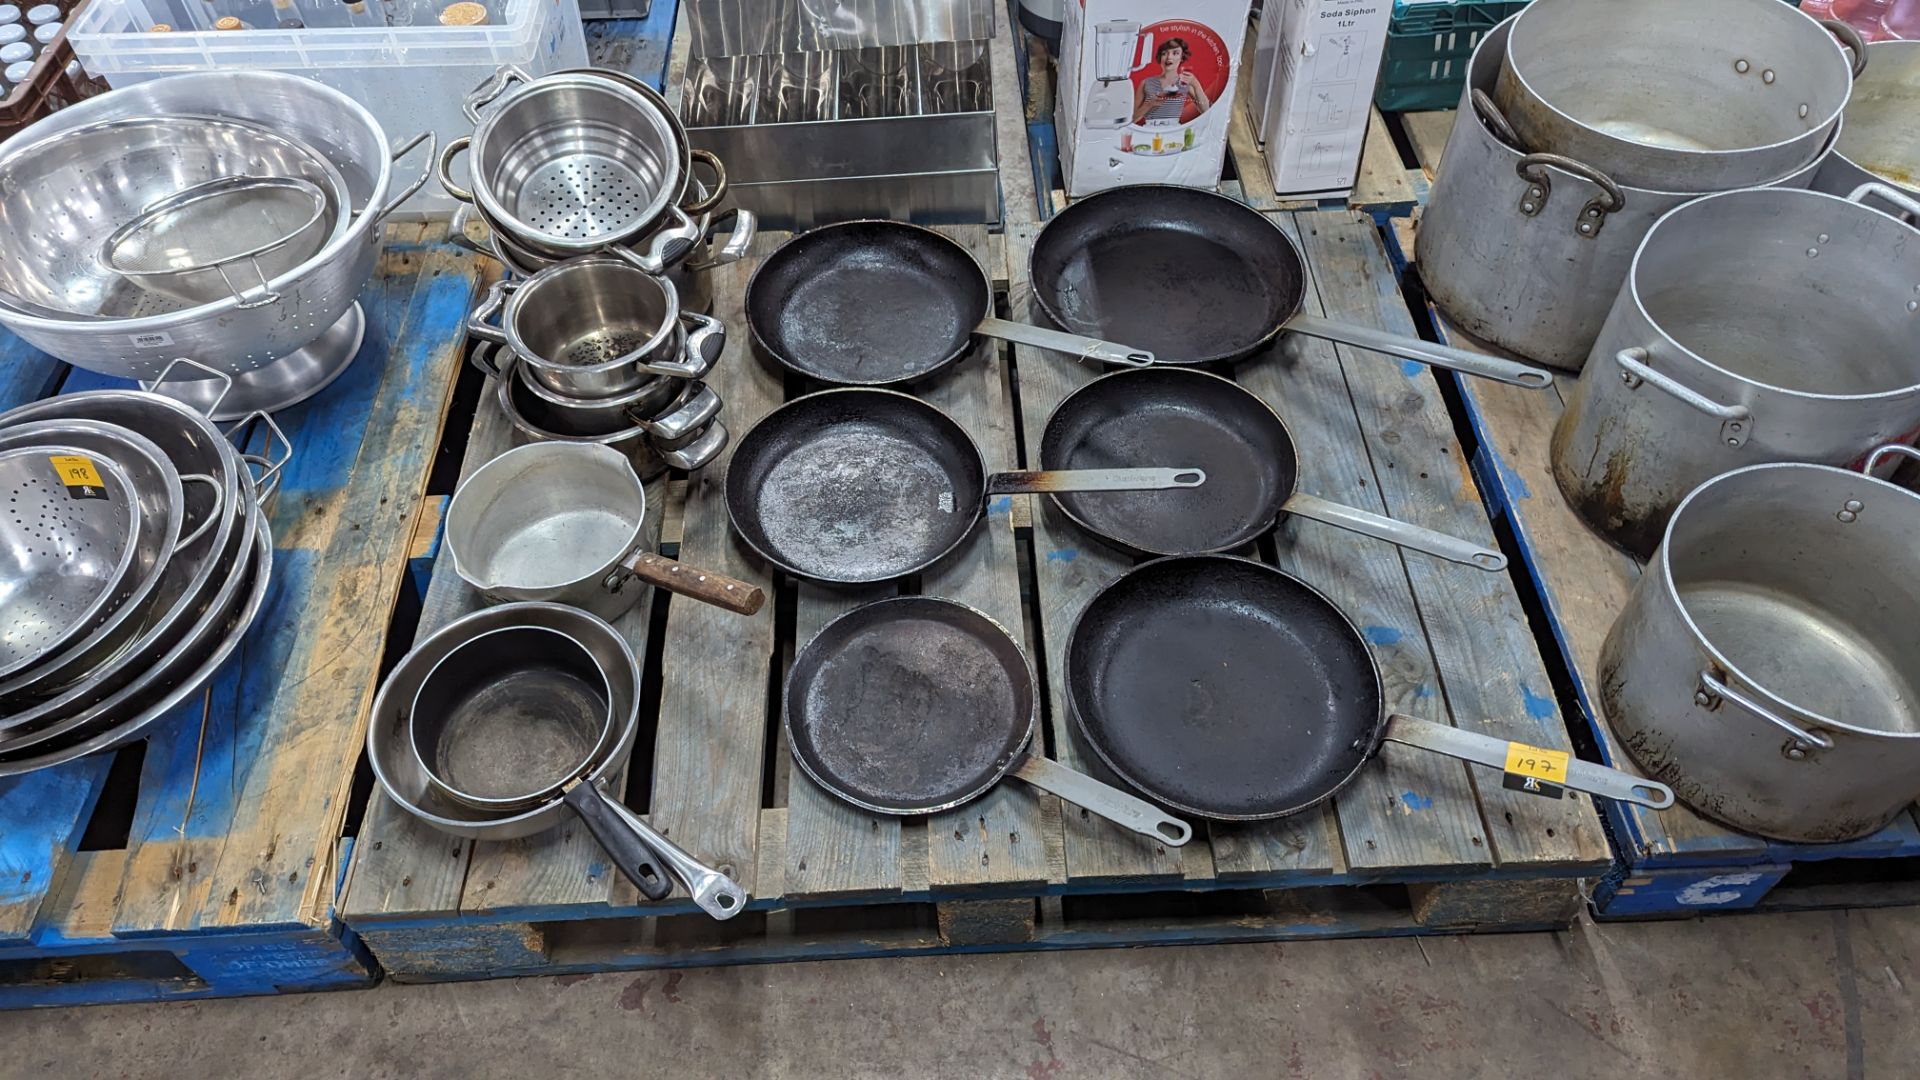 The contents of a pallet of assorted pans - 6 skillets plus 9 assorted saucepans & similar